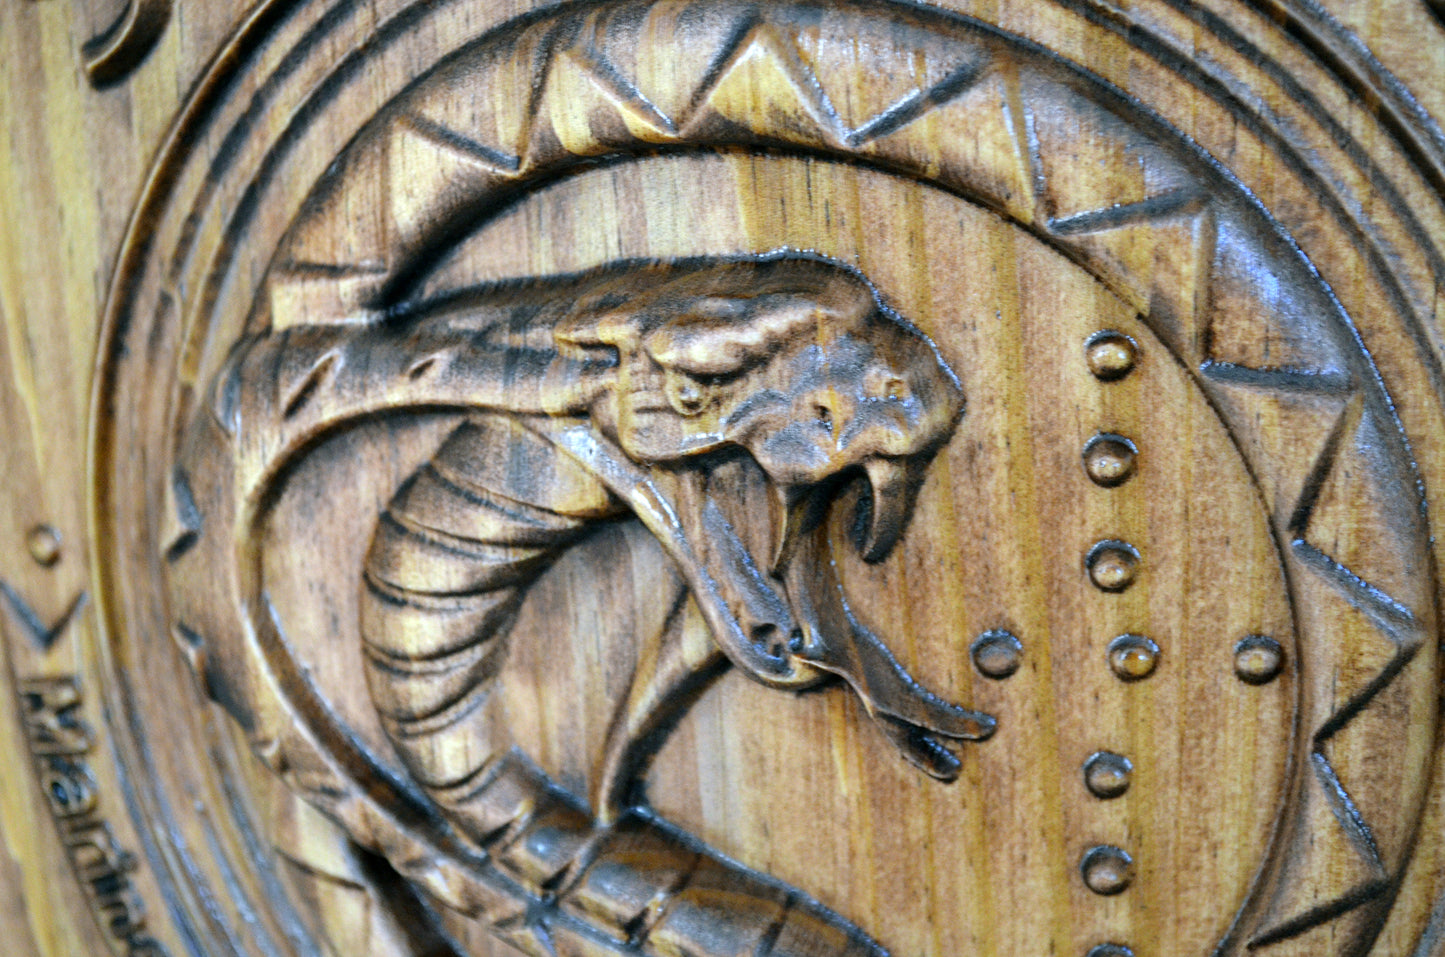 USMC Light Attack Helicopter Squadron, HMLA 367 Marine Corps Air Wing, 3d wood carving, military plaque